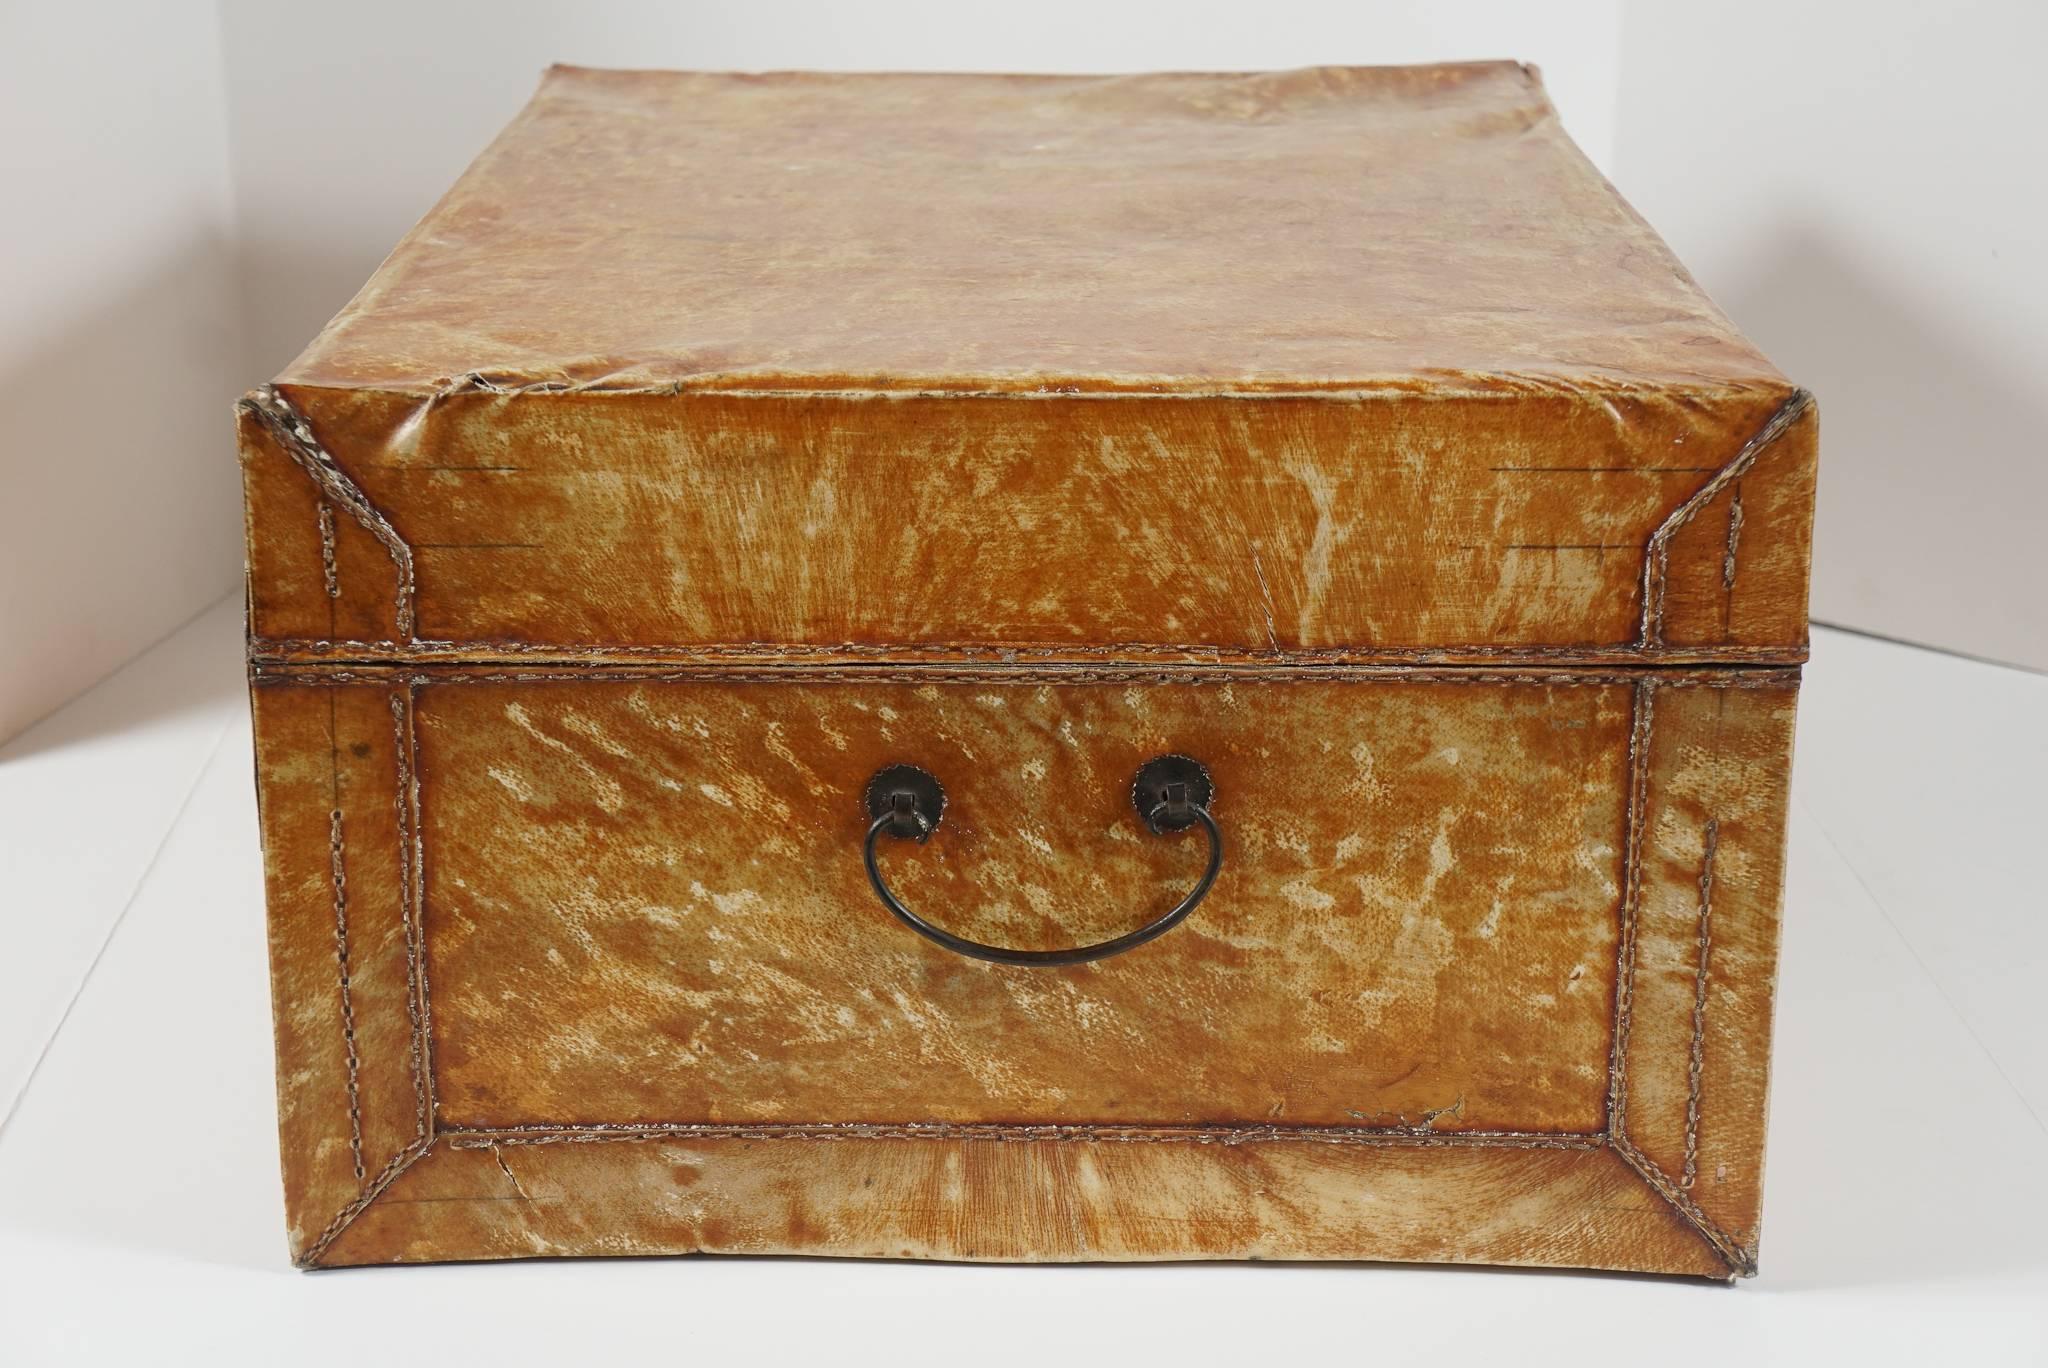 Chinese Camphor Wood and Pig Skin Covered Trunk from the Estate of Bunny Mellon